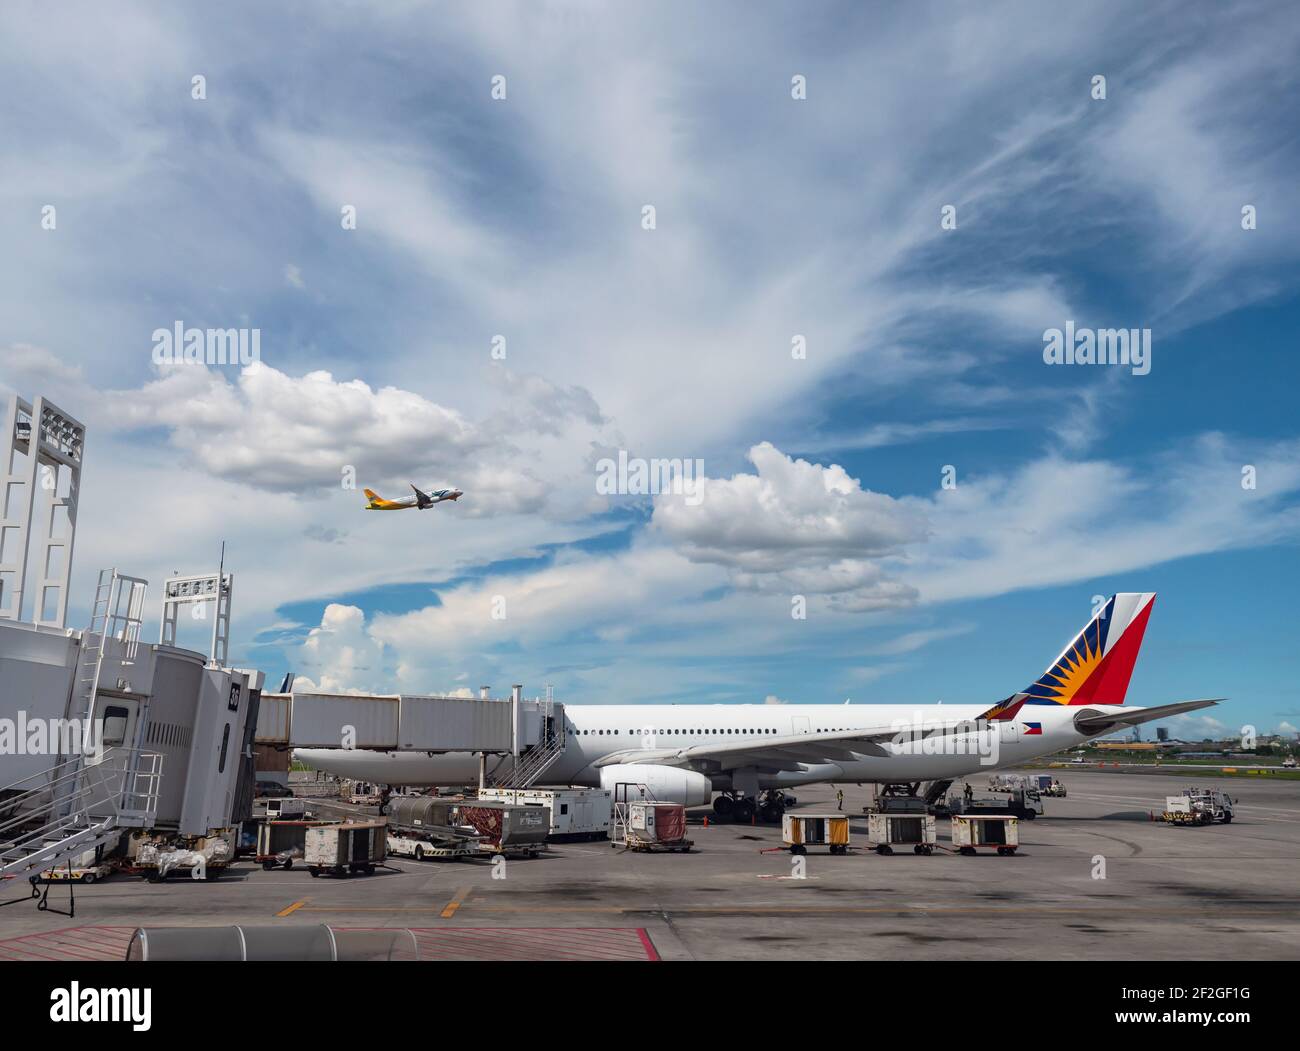 Philippine Airlines Airbus A330 at Terminal 2 of Ninoy Aquino International Airport in Manila, with Cebu Pacific Airbus A320 flying above. Stock Photo